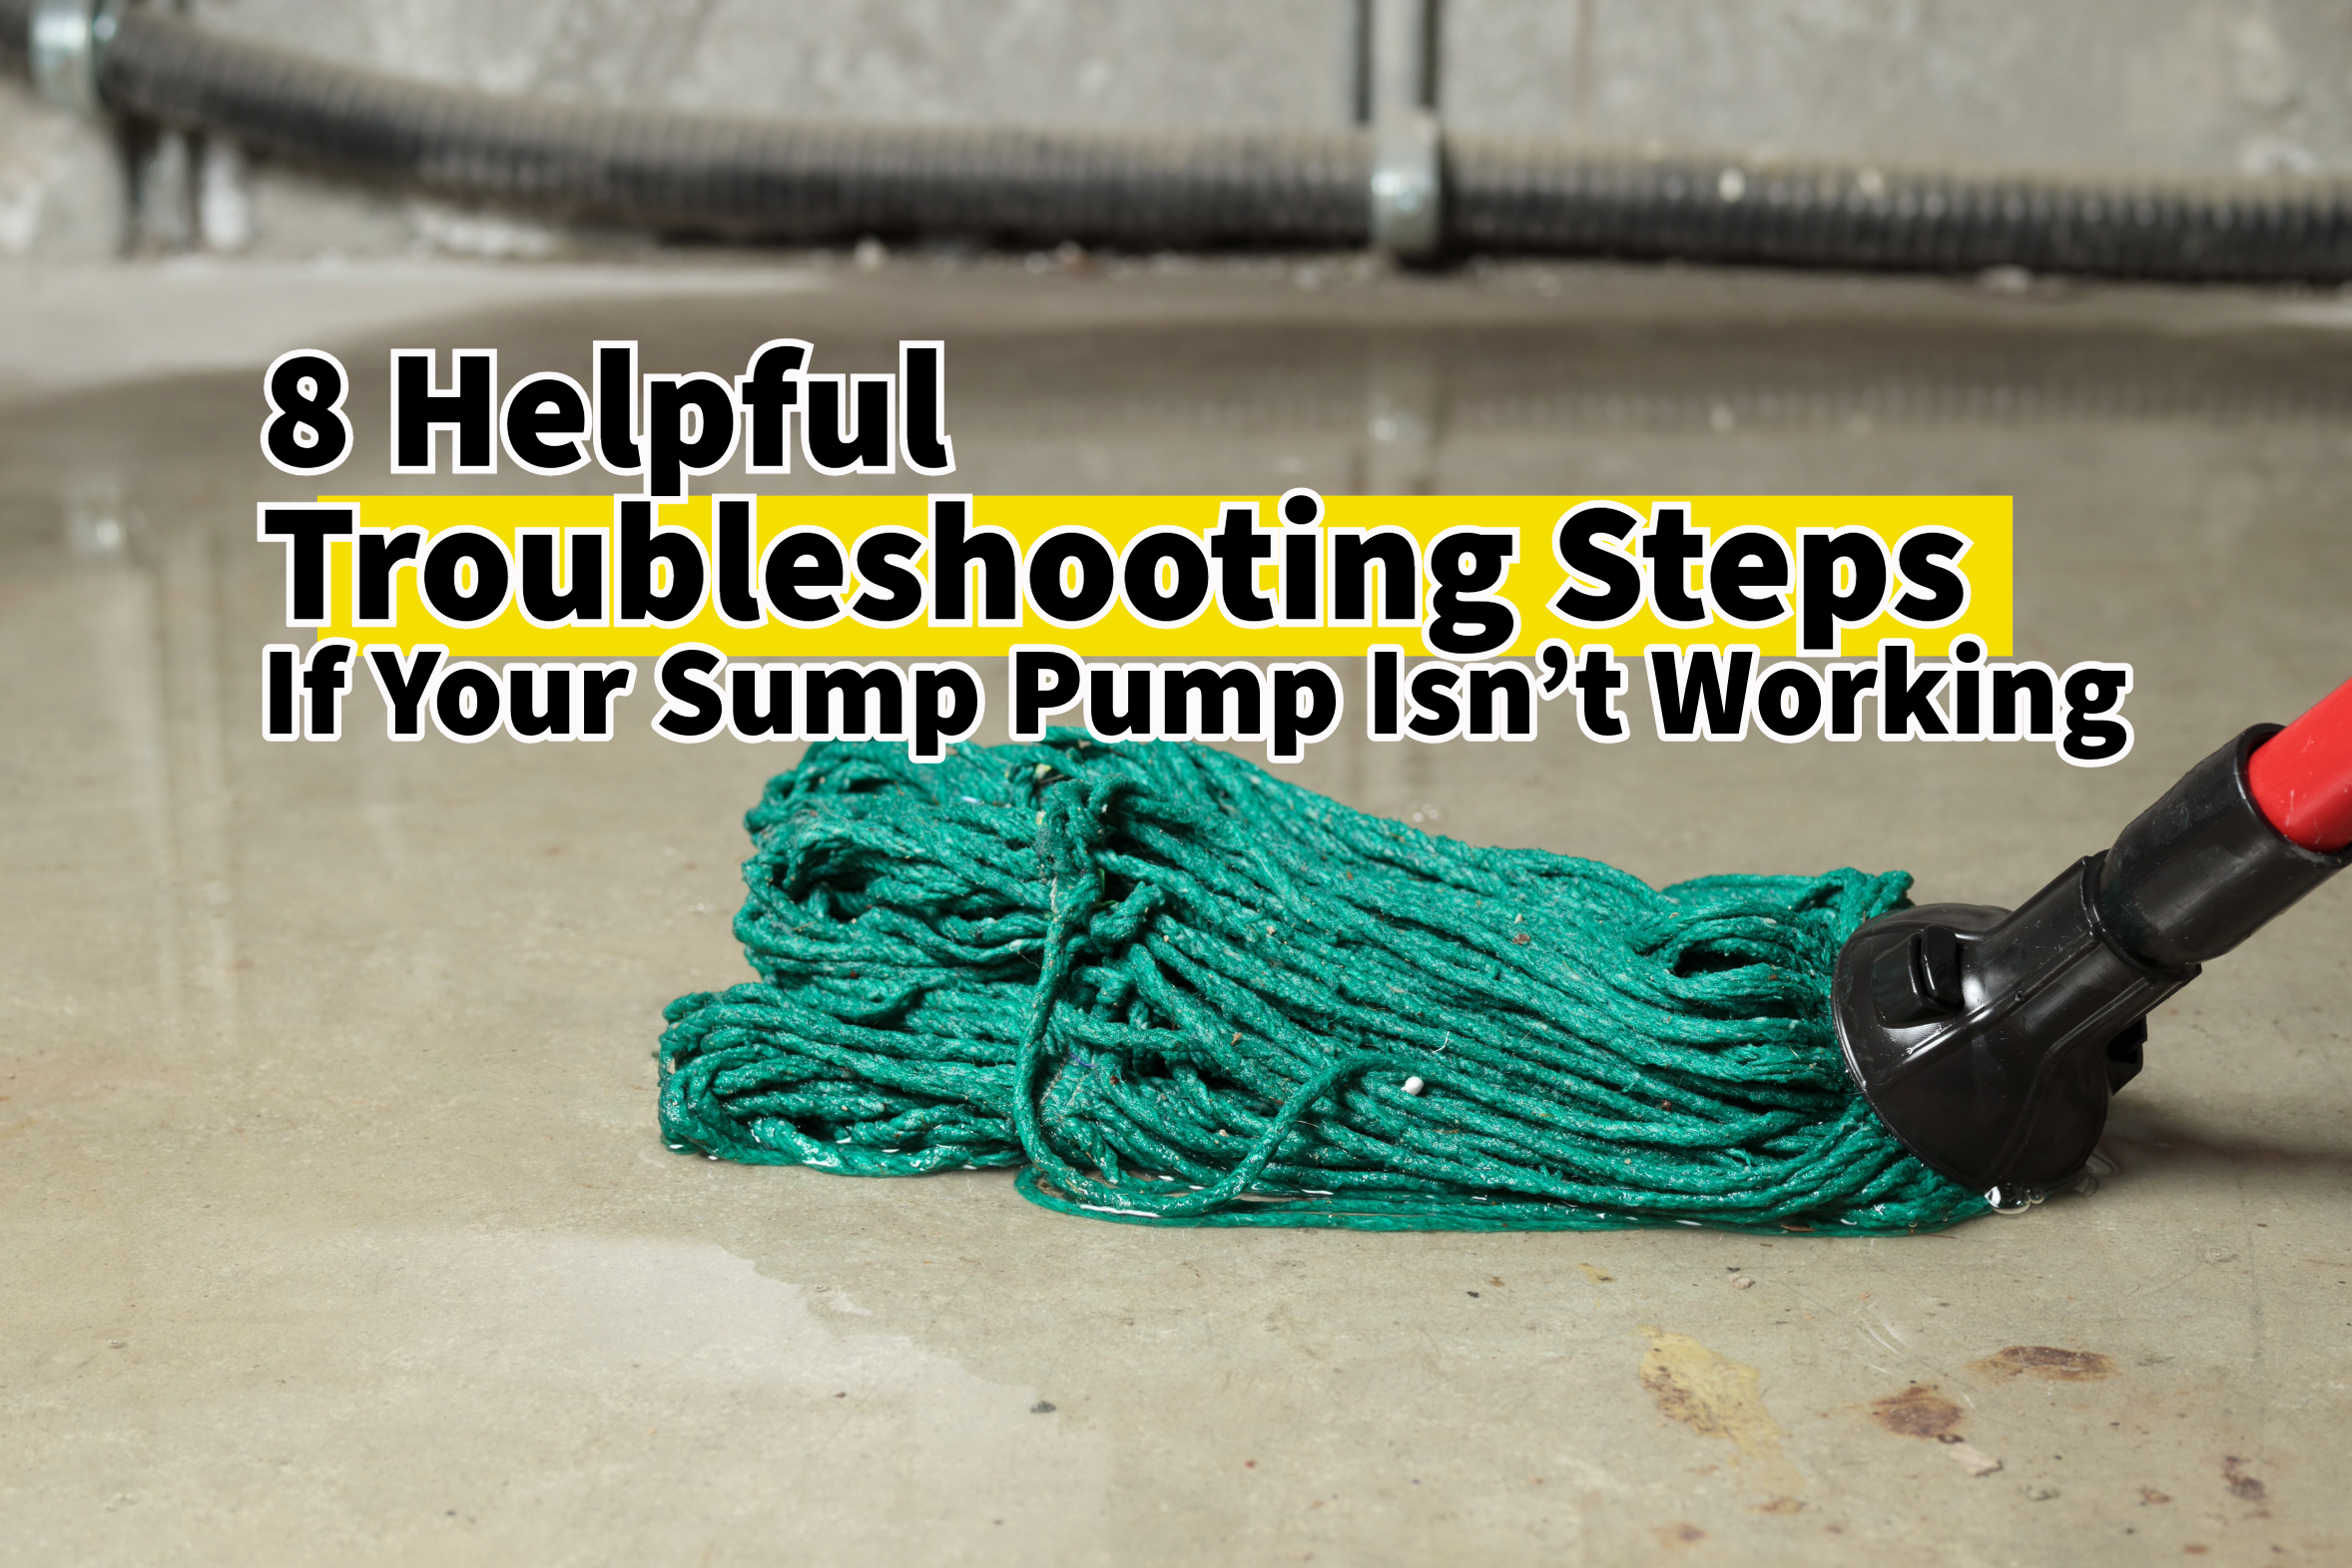 Know how to troubleshoot your sump pump problems if your sump pump is acting up.